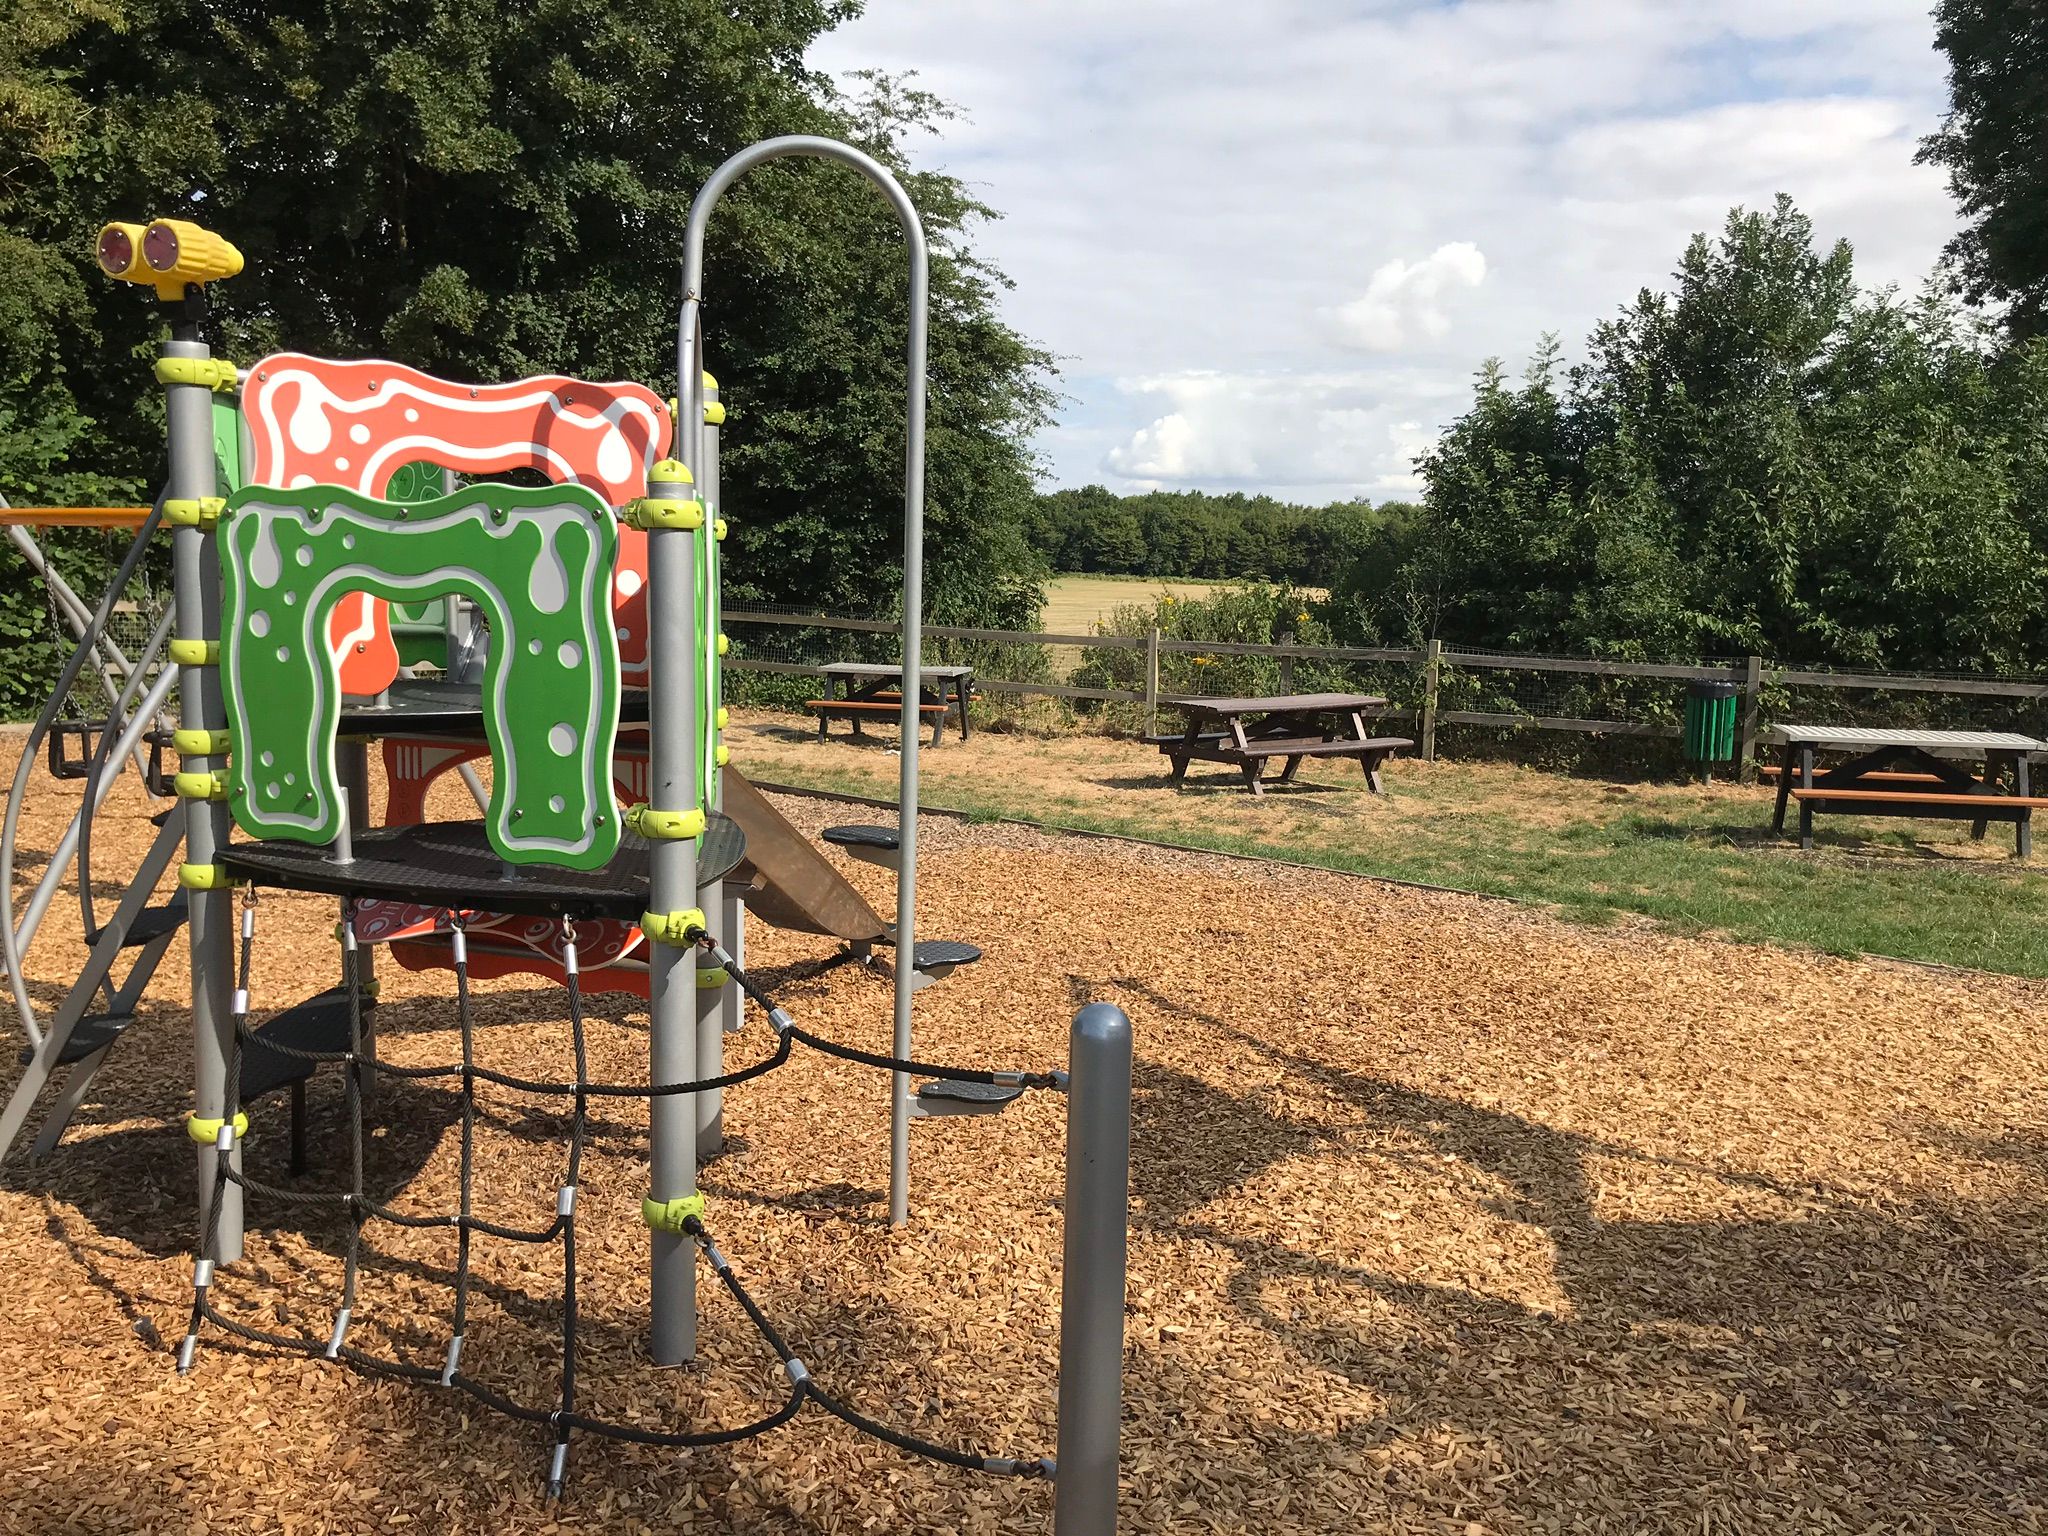 The smaller climbing frame and picnic benches at Lordswood play area.